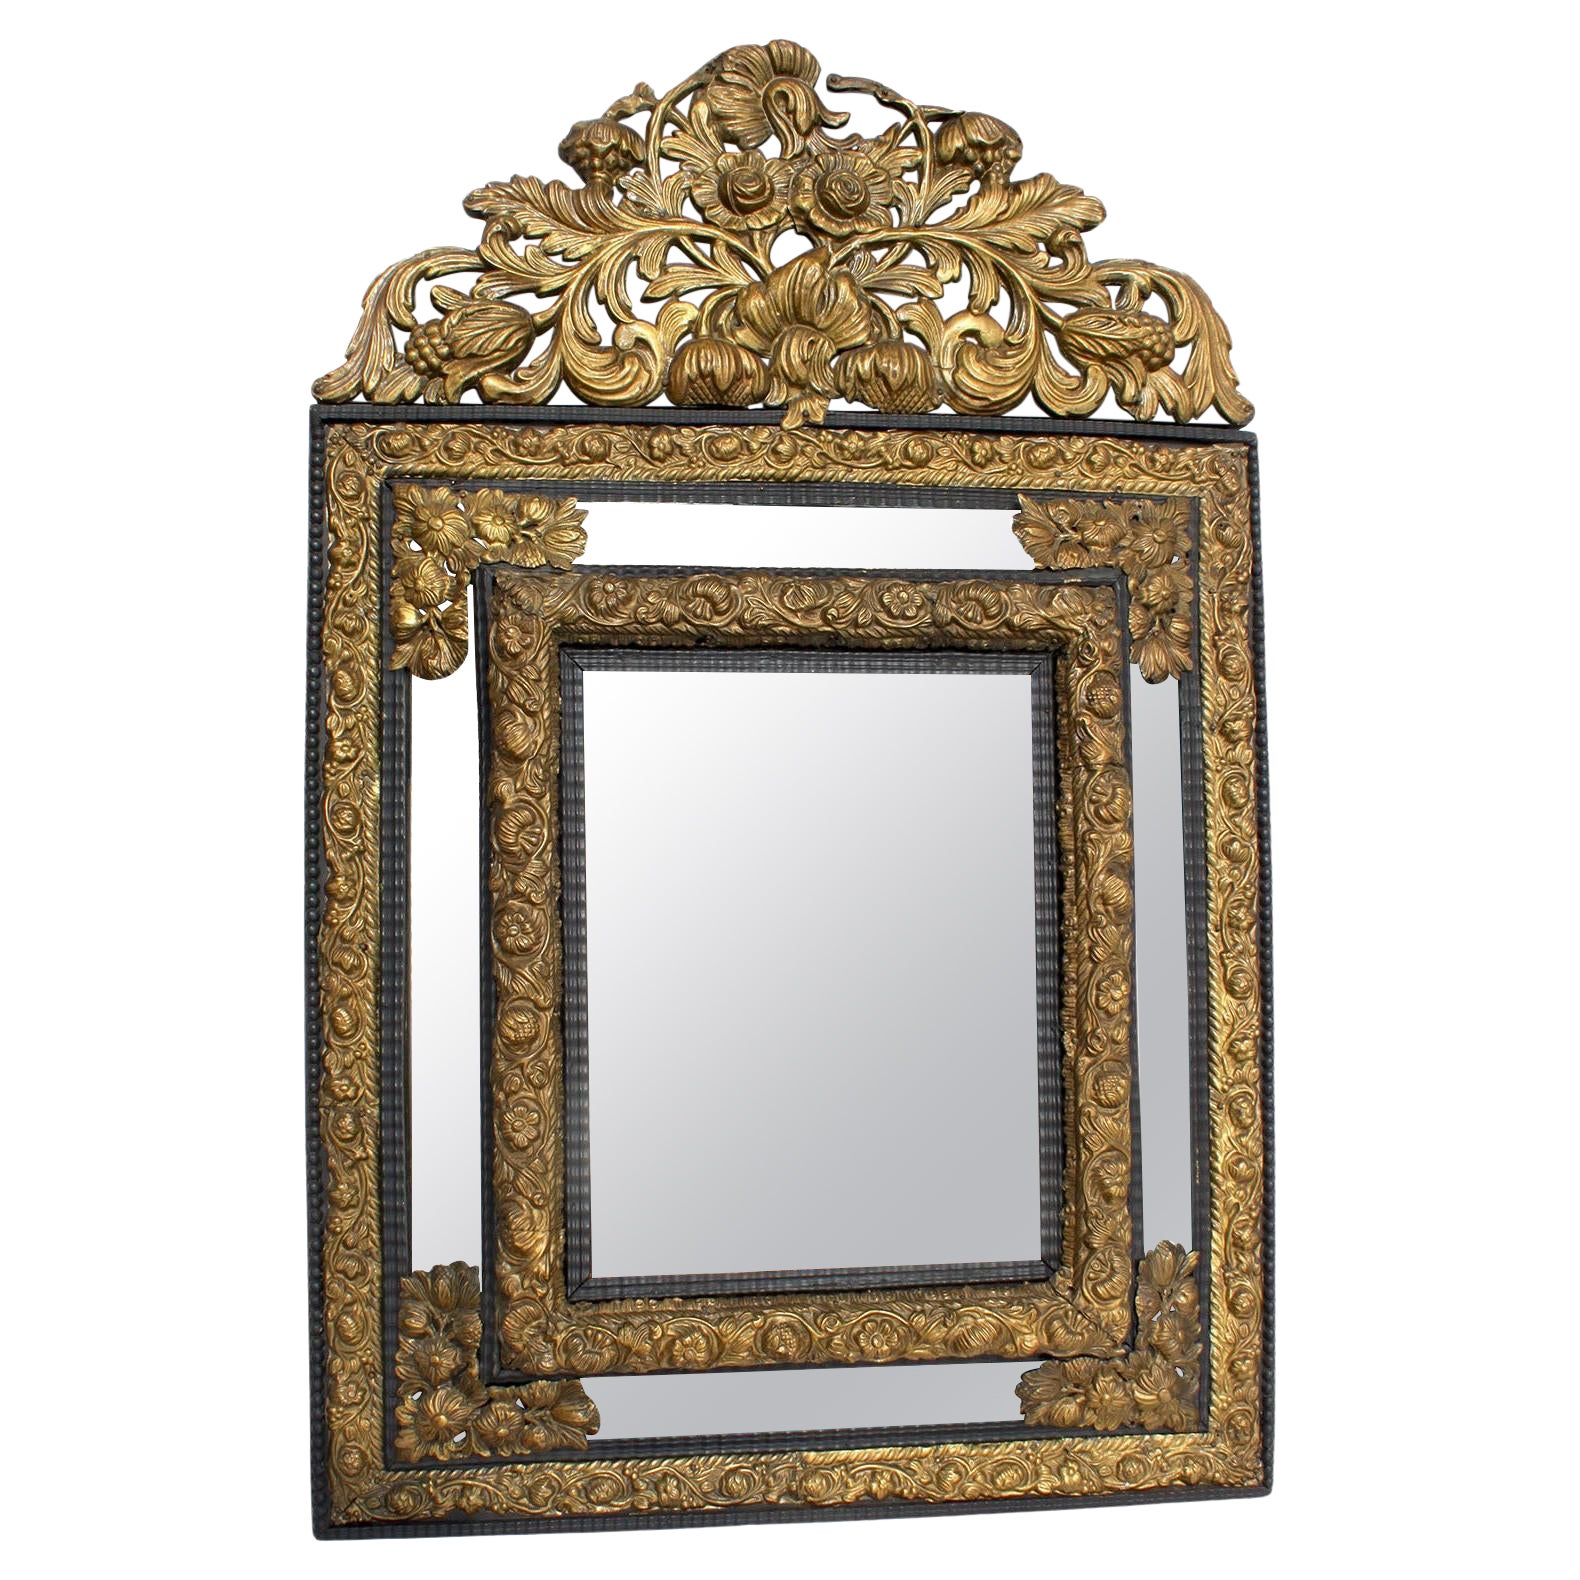 A French 19th Century Baroque Style Hammered Gilt-Brass Repoussé Mirror Frame For Sale